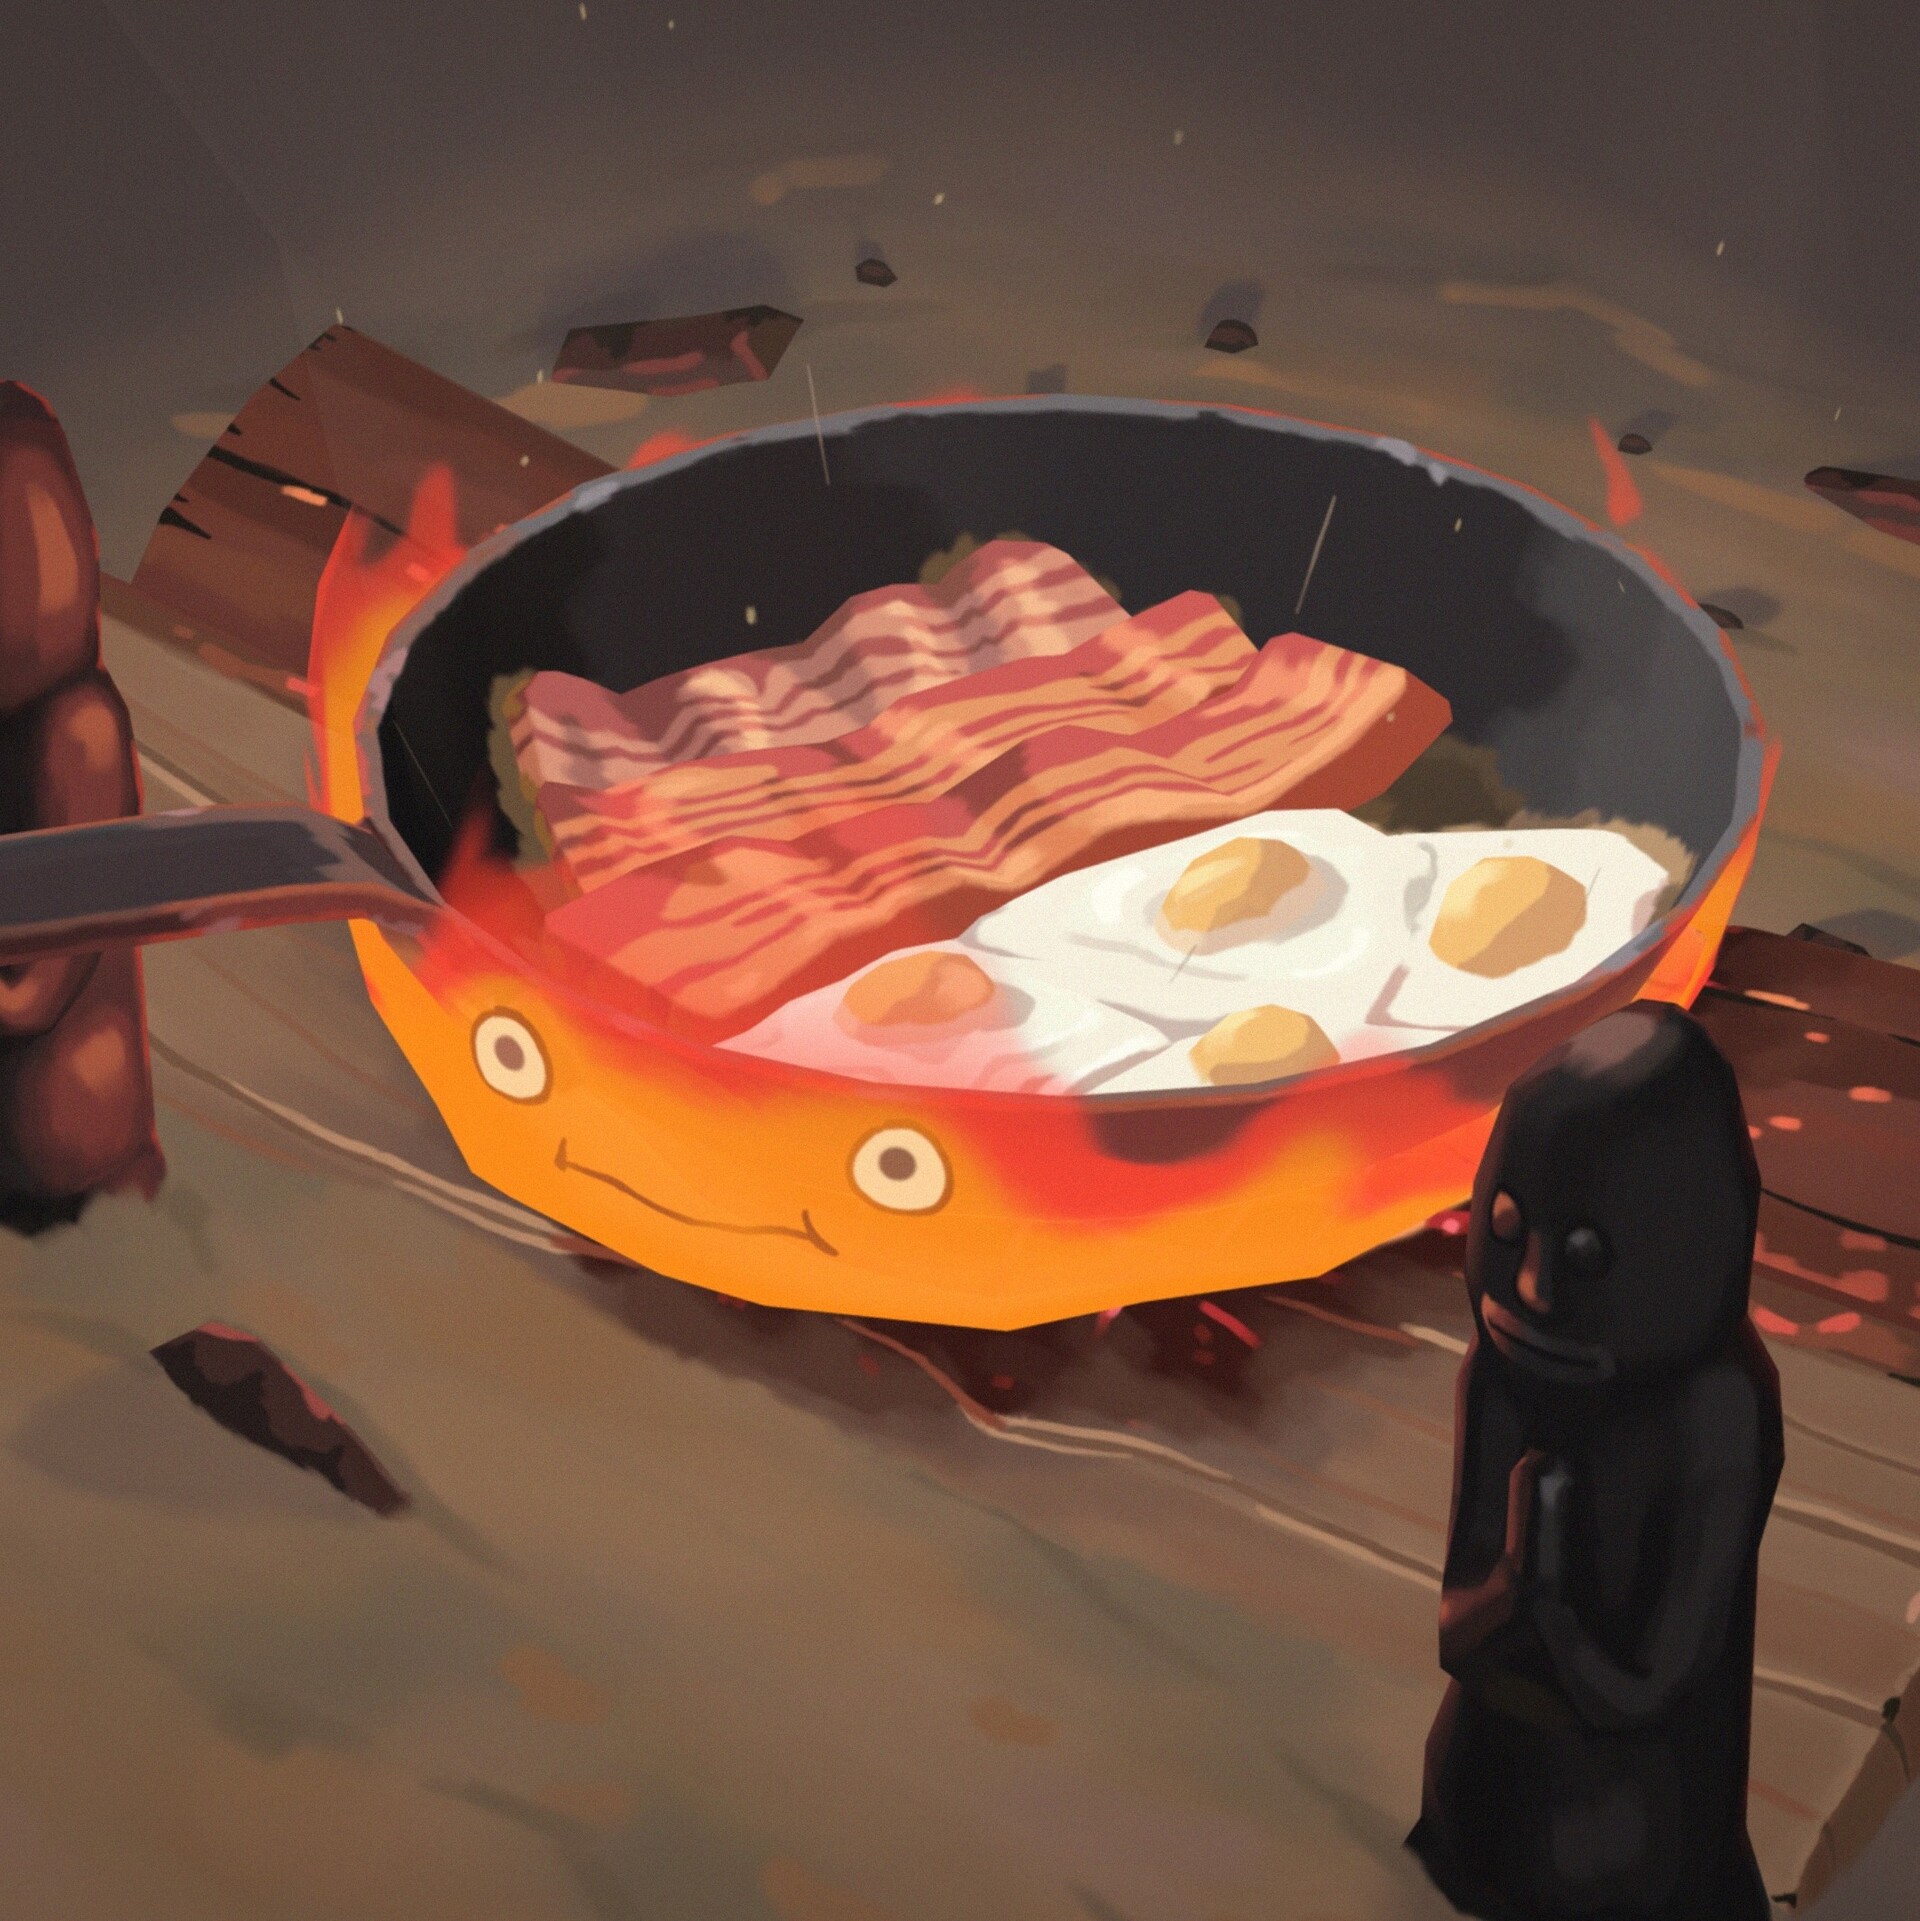 ArtStation - Calcifer Cooking Bacon and Eggs